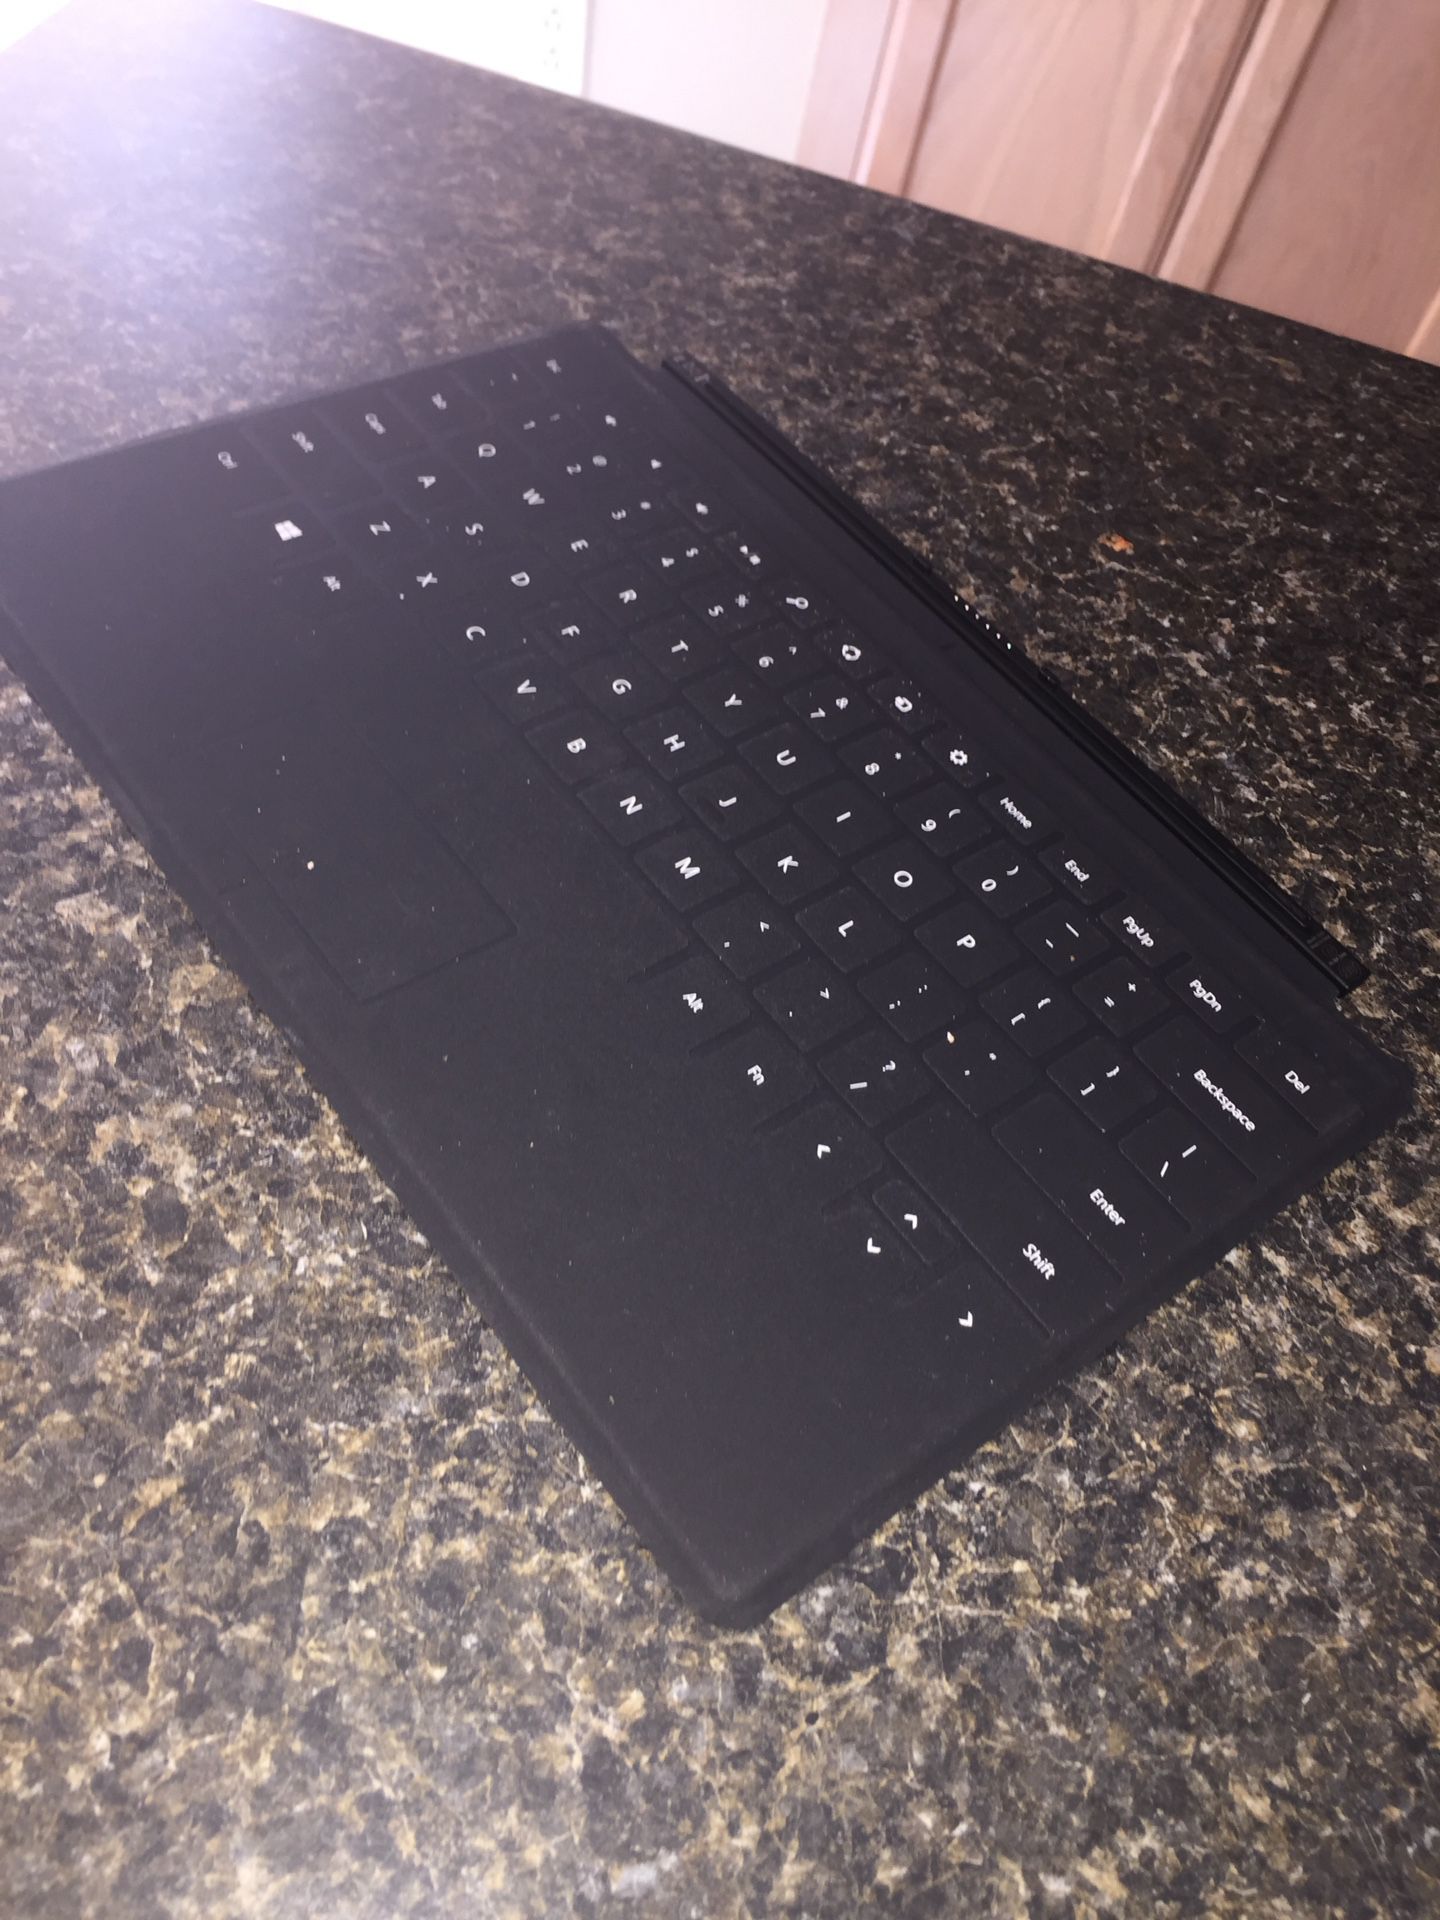 MICROSOFT SURFACE PRO WIRELESS KEYBOARD COVER (paid $80 for it )